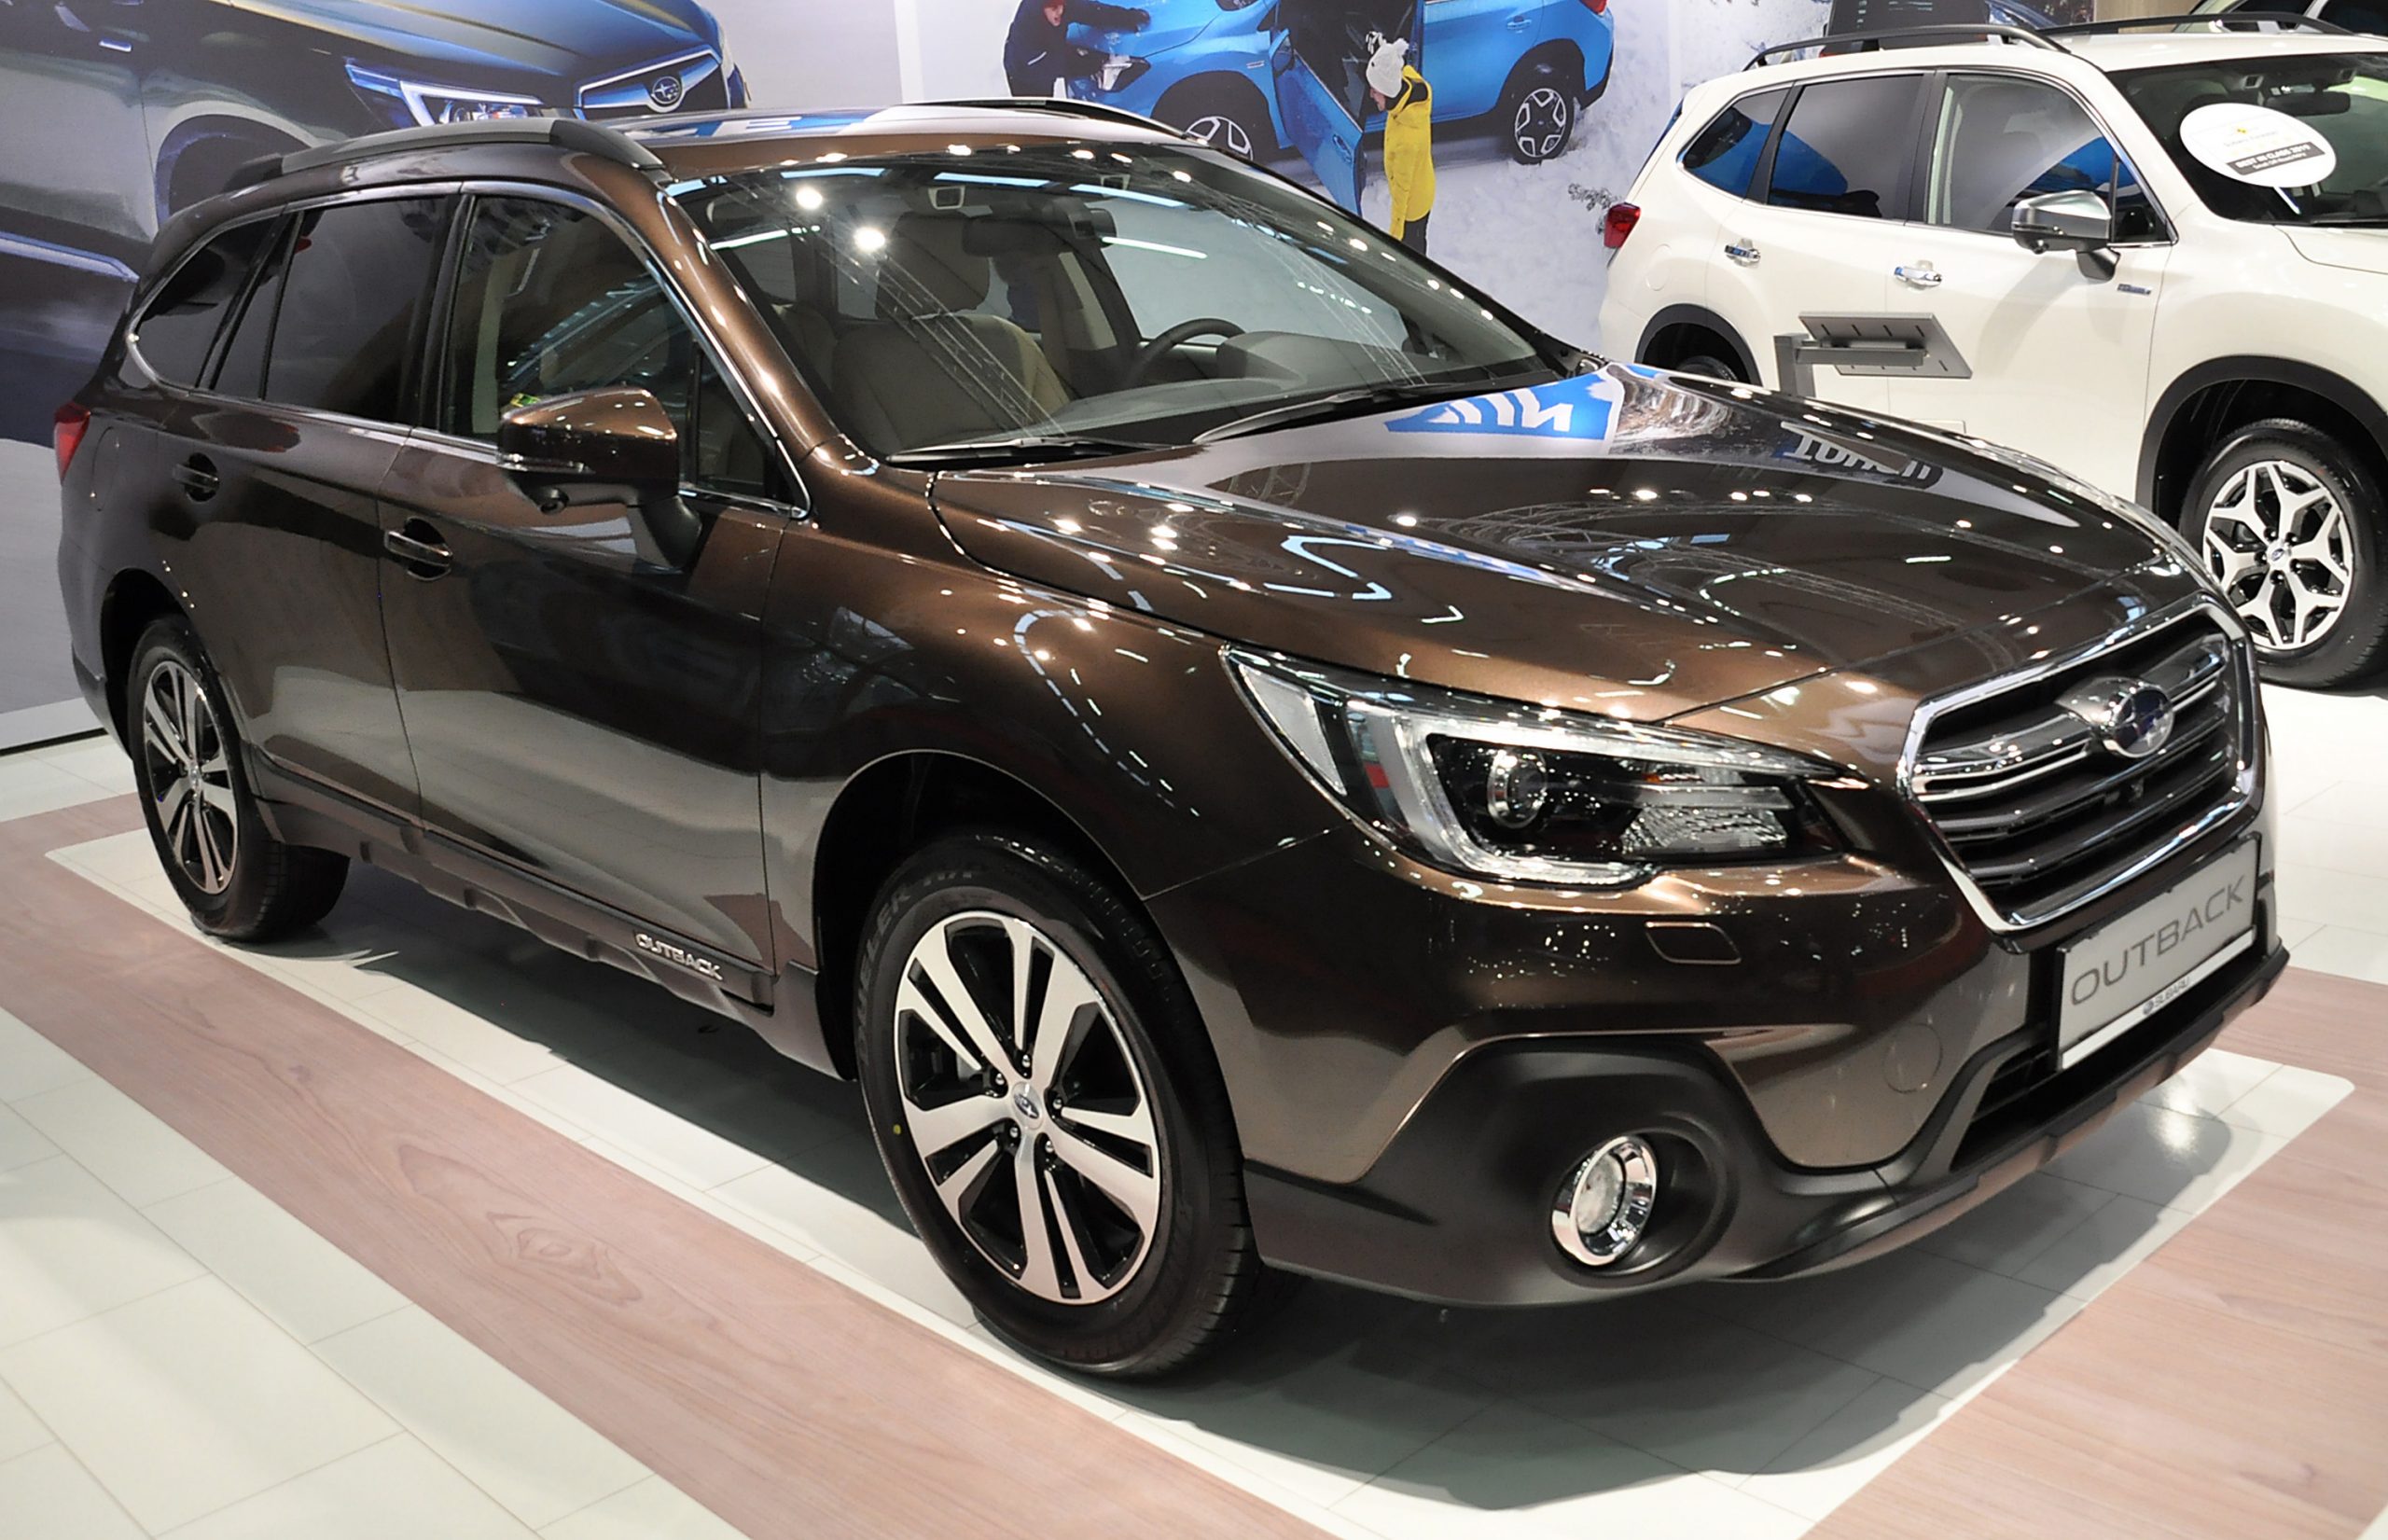 A Subaru Outback is seen during the Vienna Car Show press preview at Messe Wien, as part of Vienna Holiday Fair